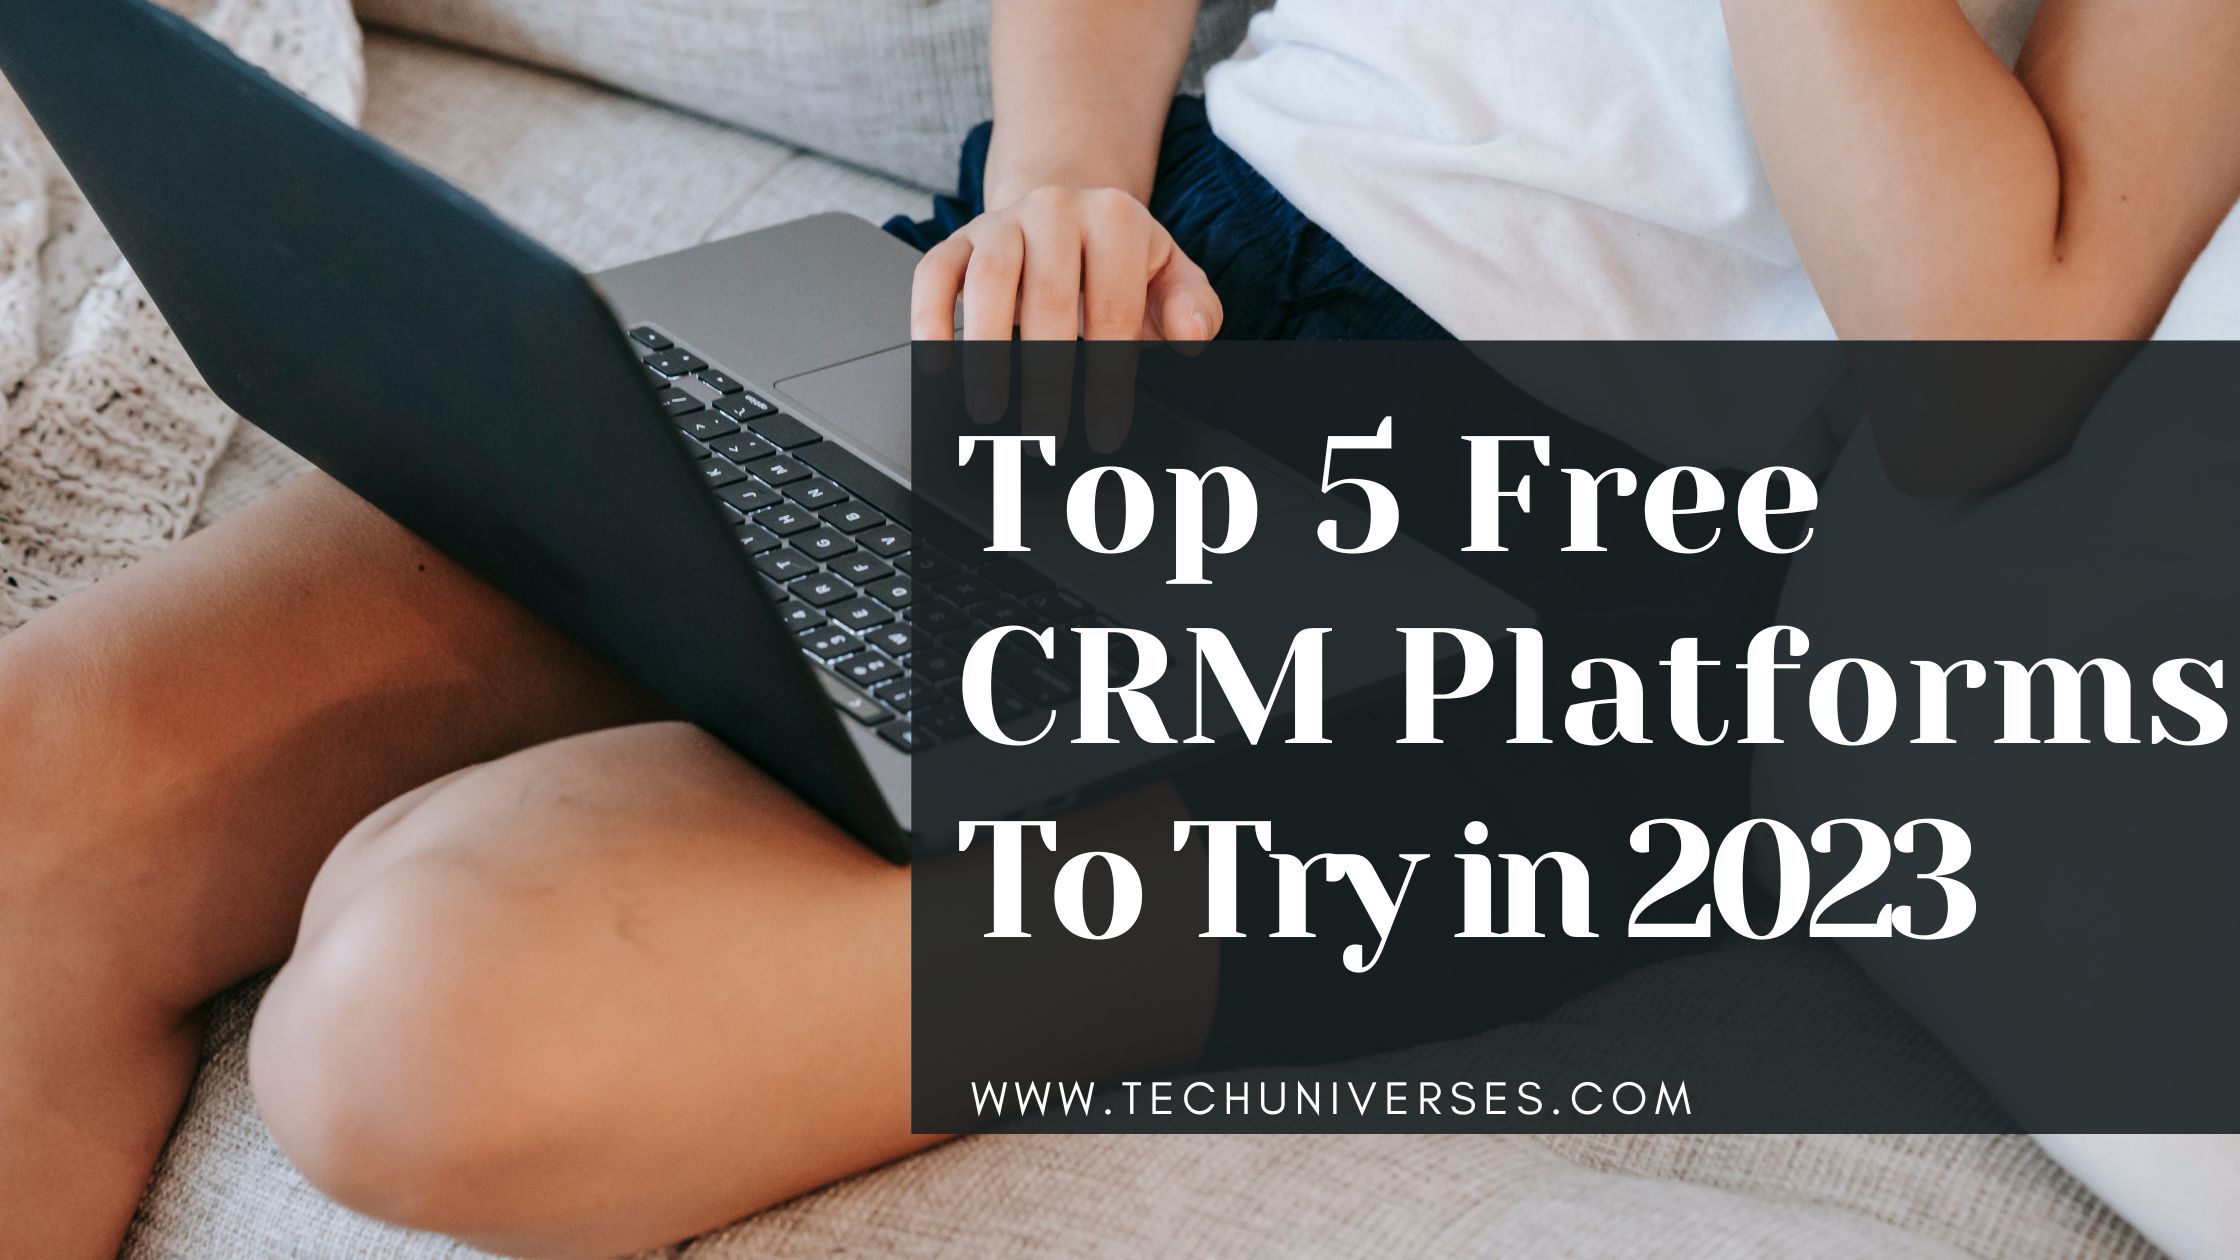 Top 5 Free CRM Platforms To Try